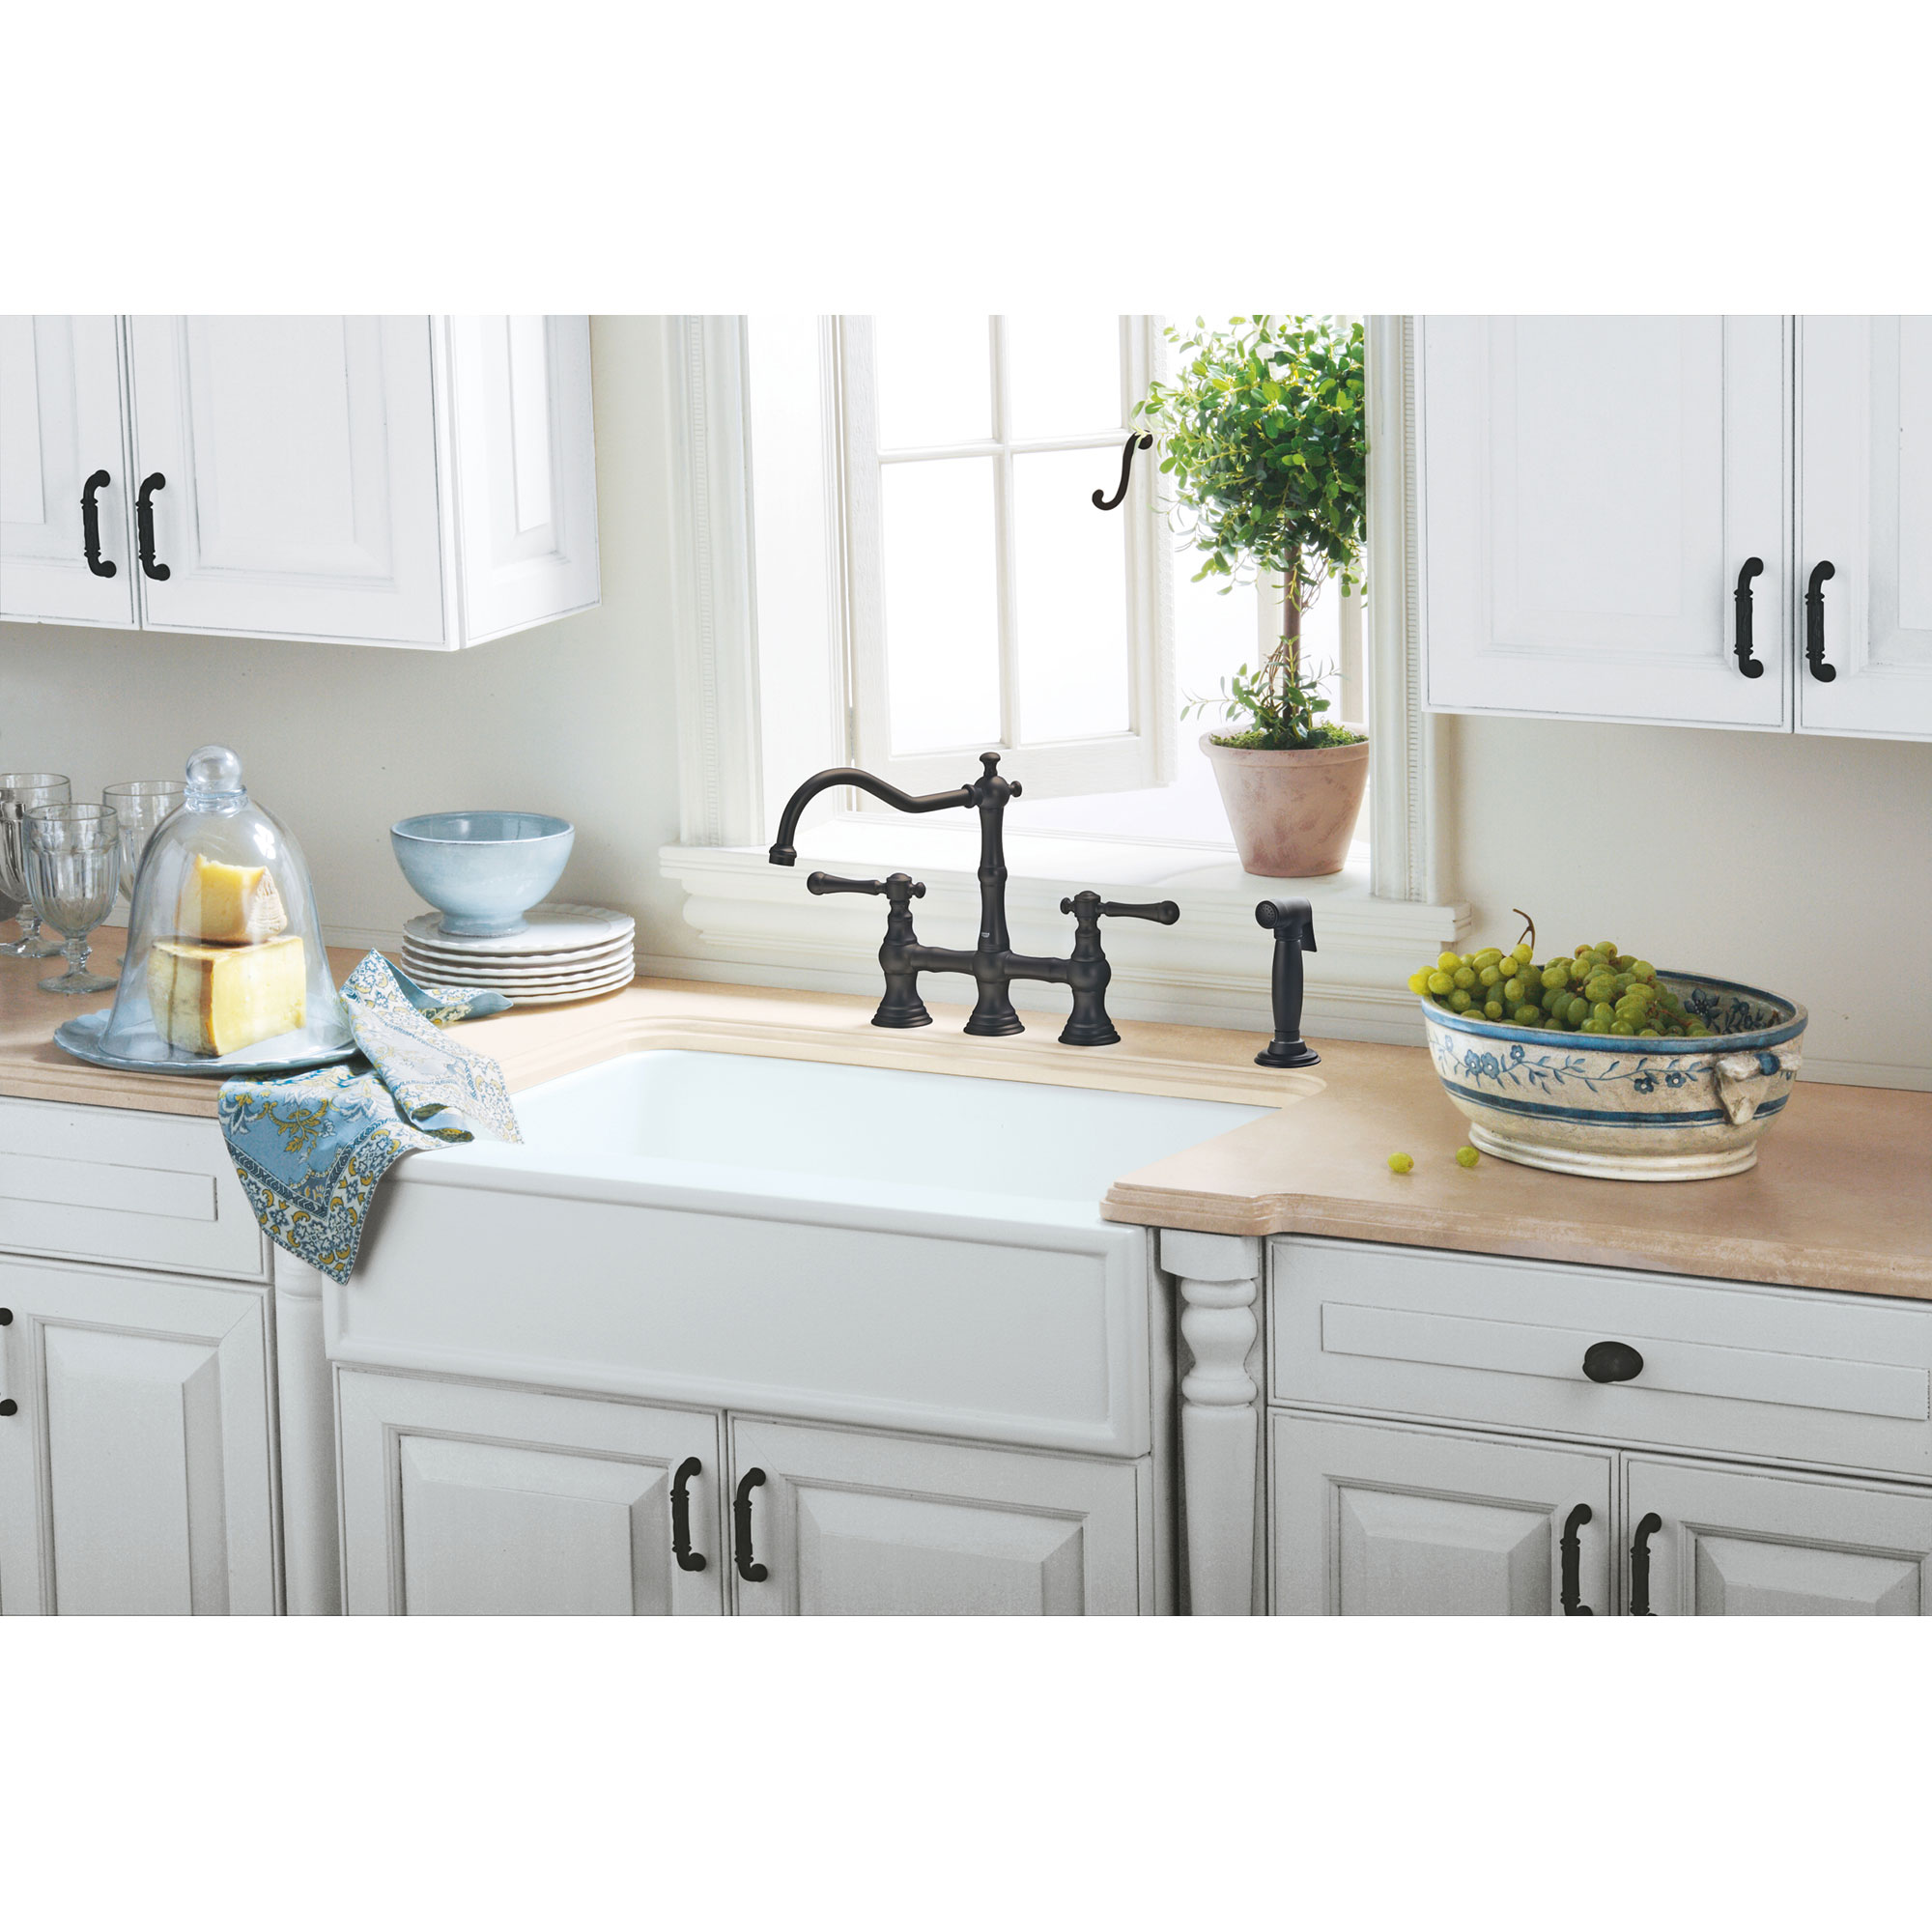 Kitchen Faucet 2 Gpm With Side Spray